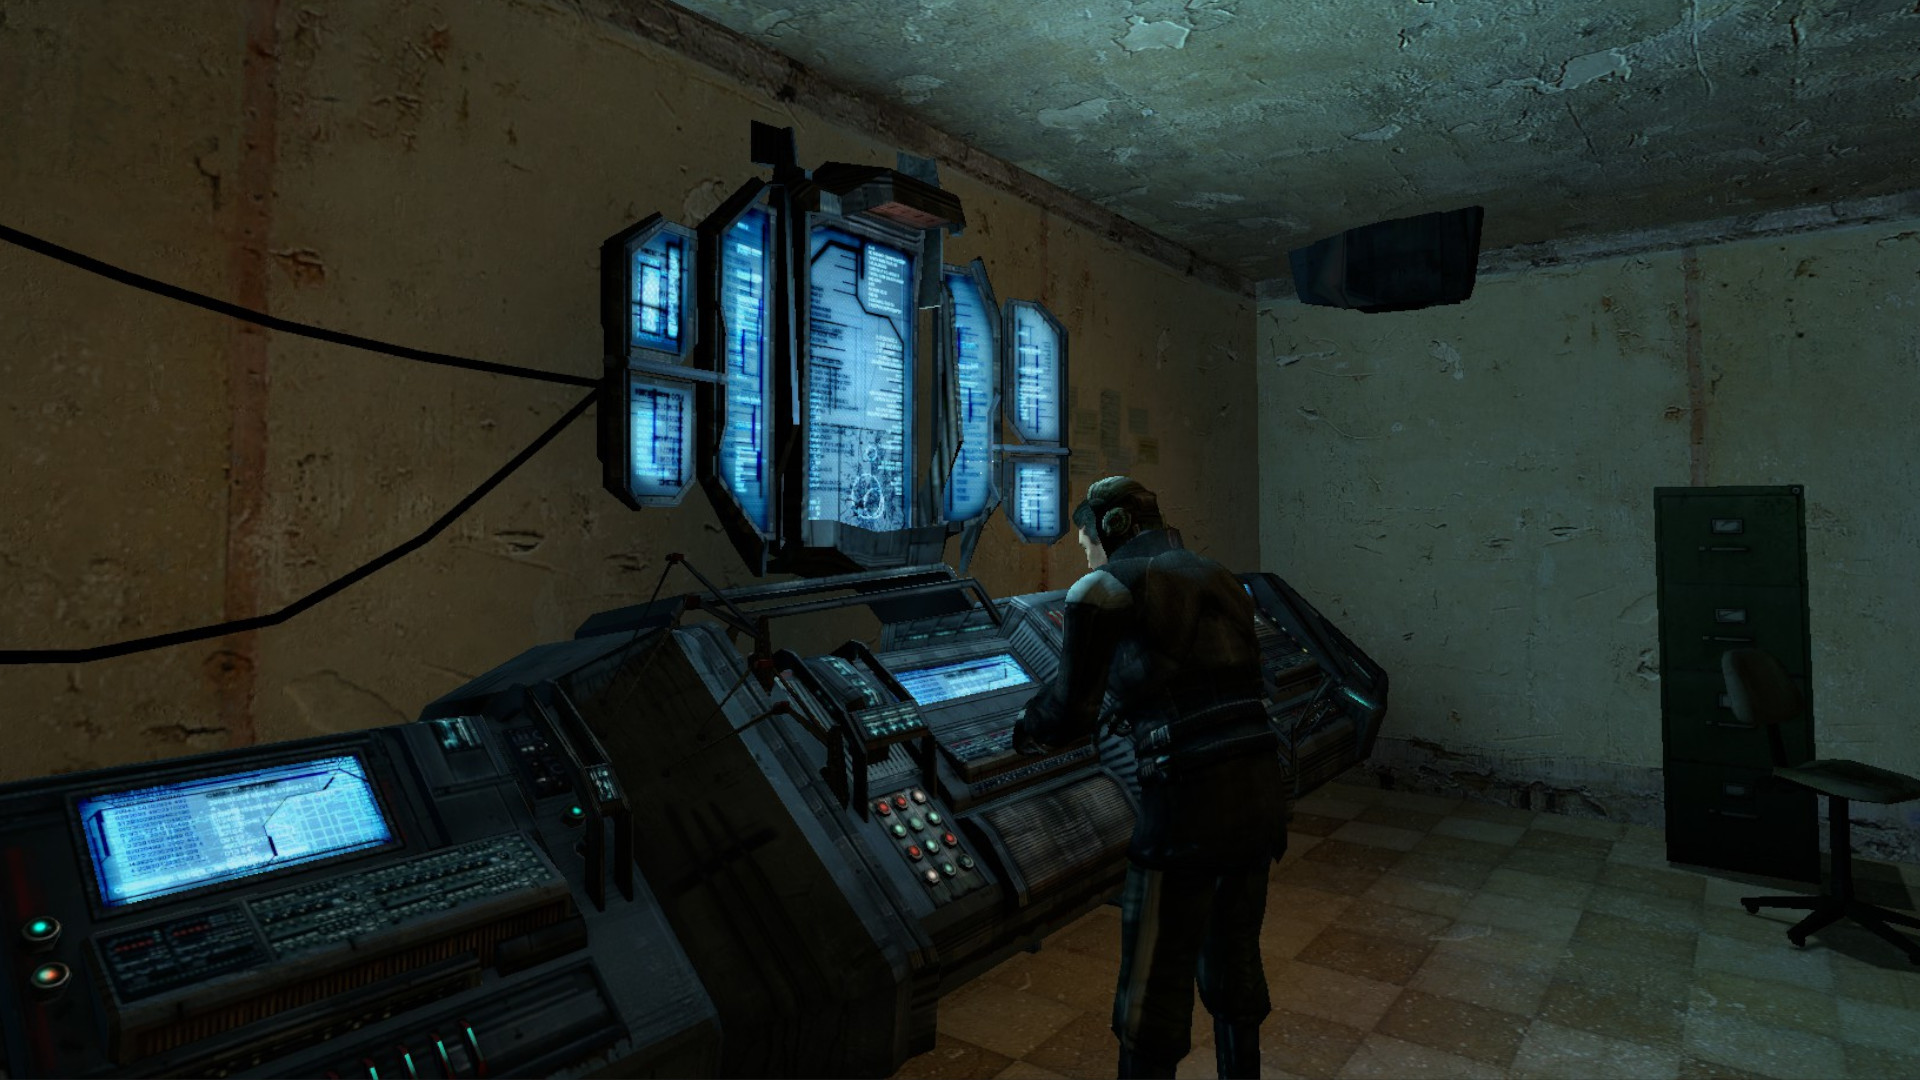 Half-Life 2 Chapter 1: Barney, a security guard, contacts Doctor Kleiner through a futuristic computer with a large blue multi-panel screen